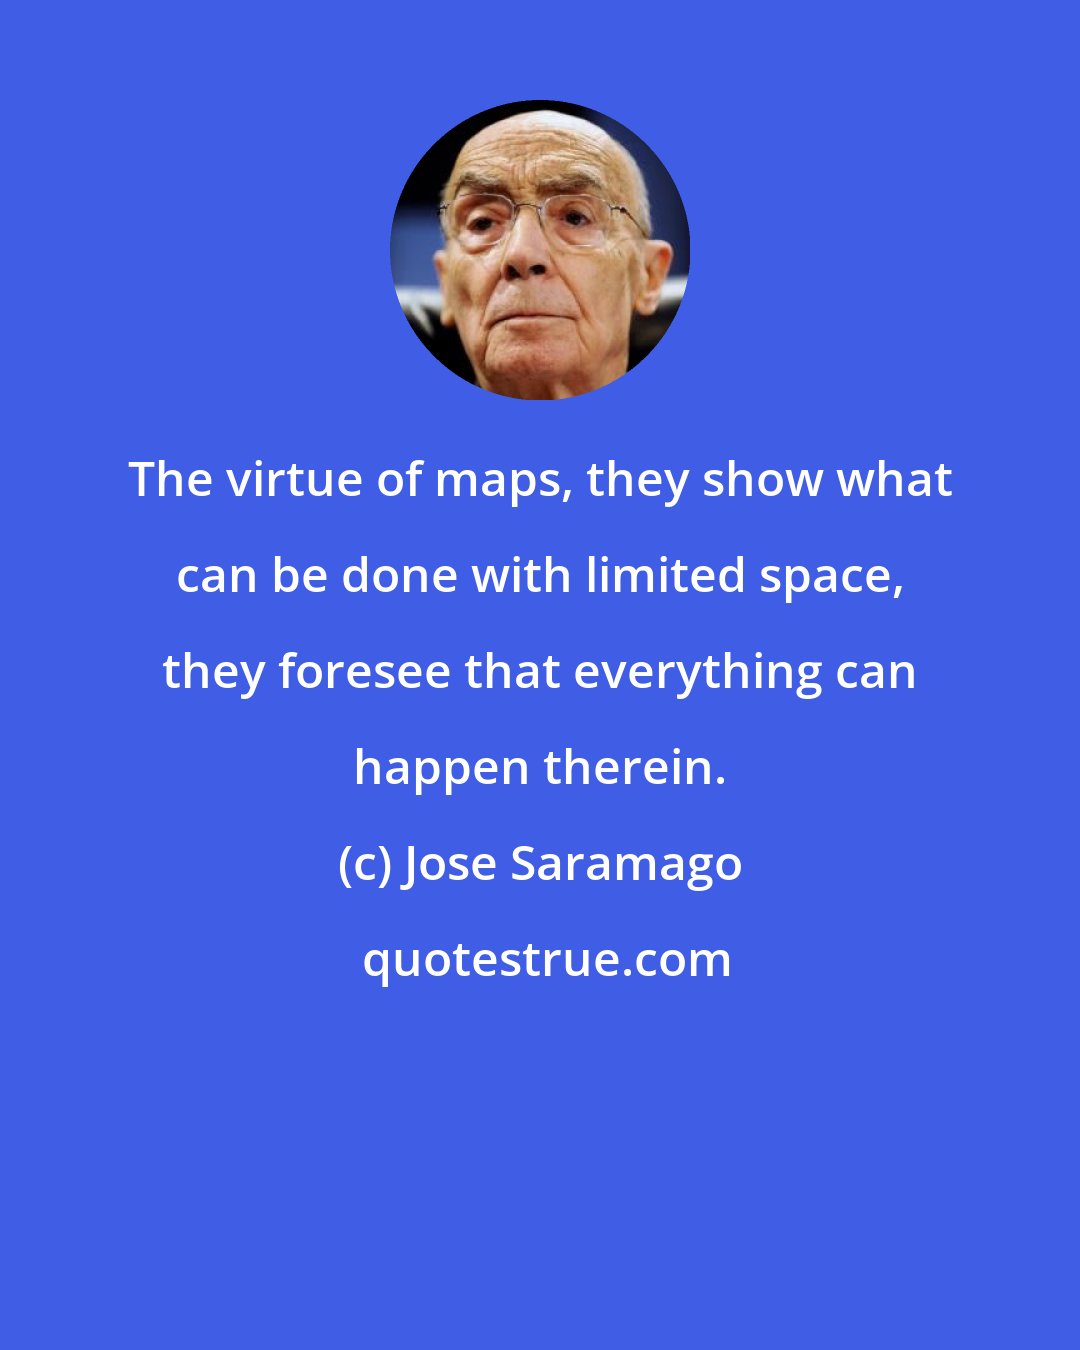 Jose Saramago: The virtue of maps, they show what can be done with limited space, they foresee that everything can happen therein.